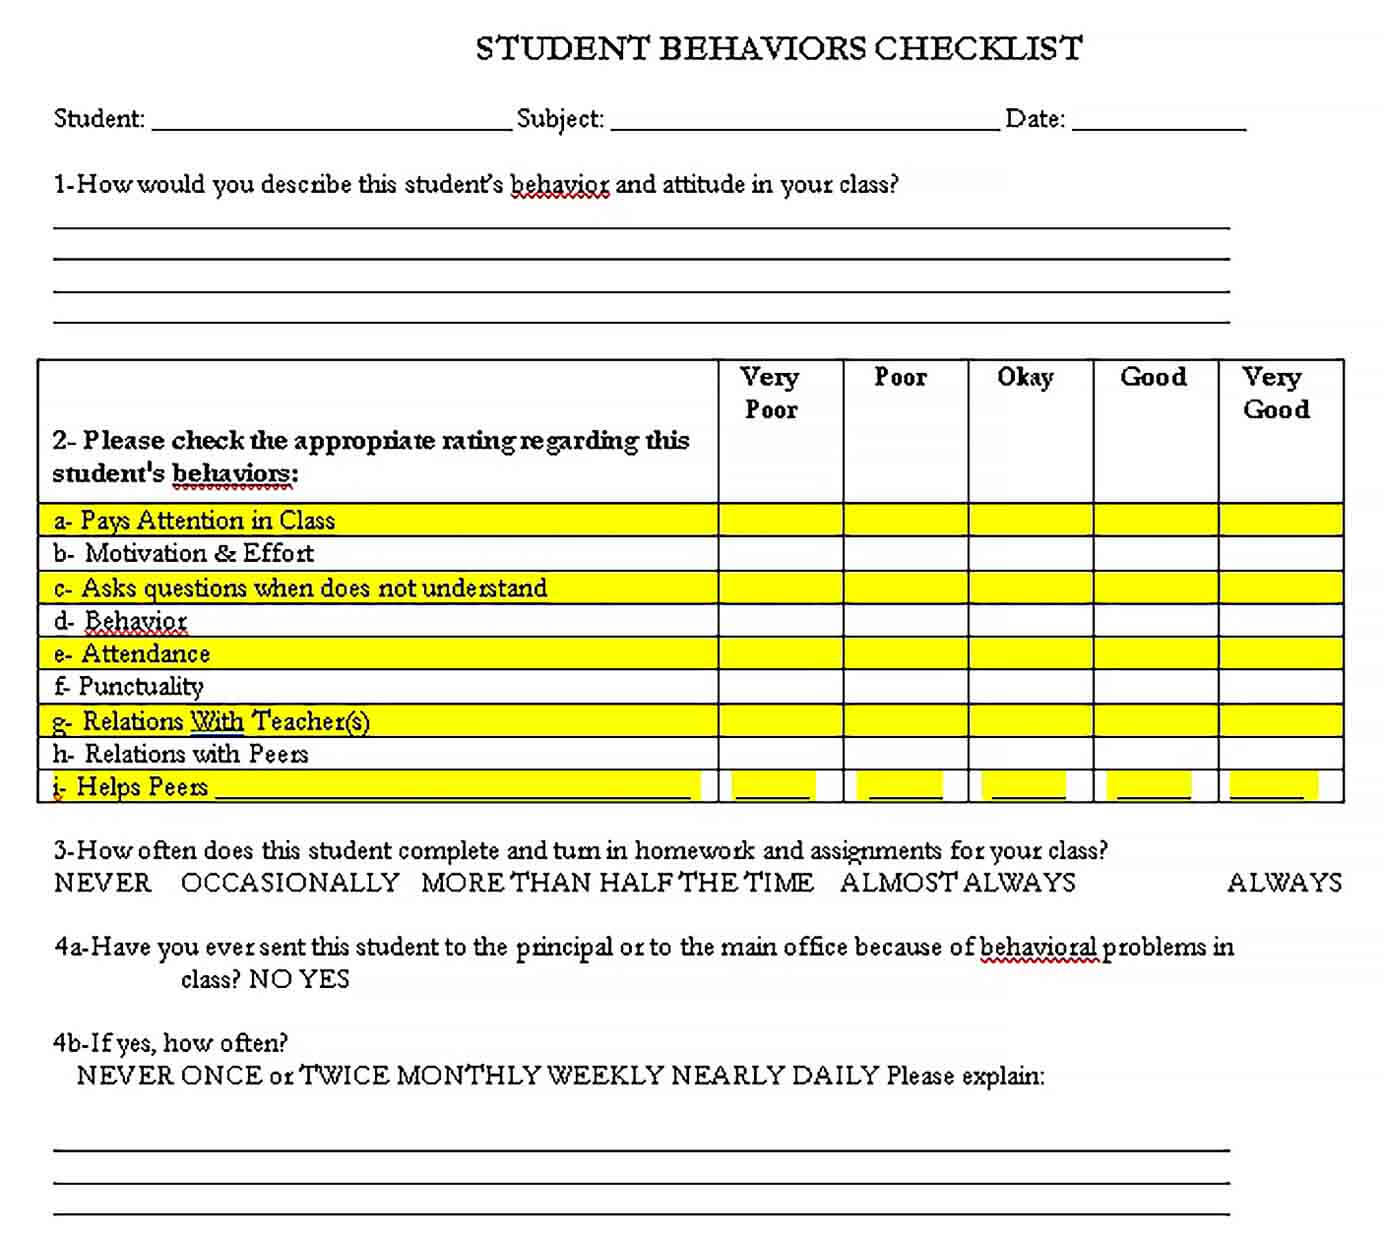 Daily Checklist Template  Pertaining To Student Behavior Checklist Template In Student Behavior Checklist Template